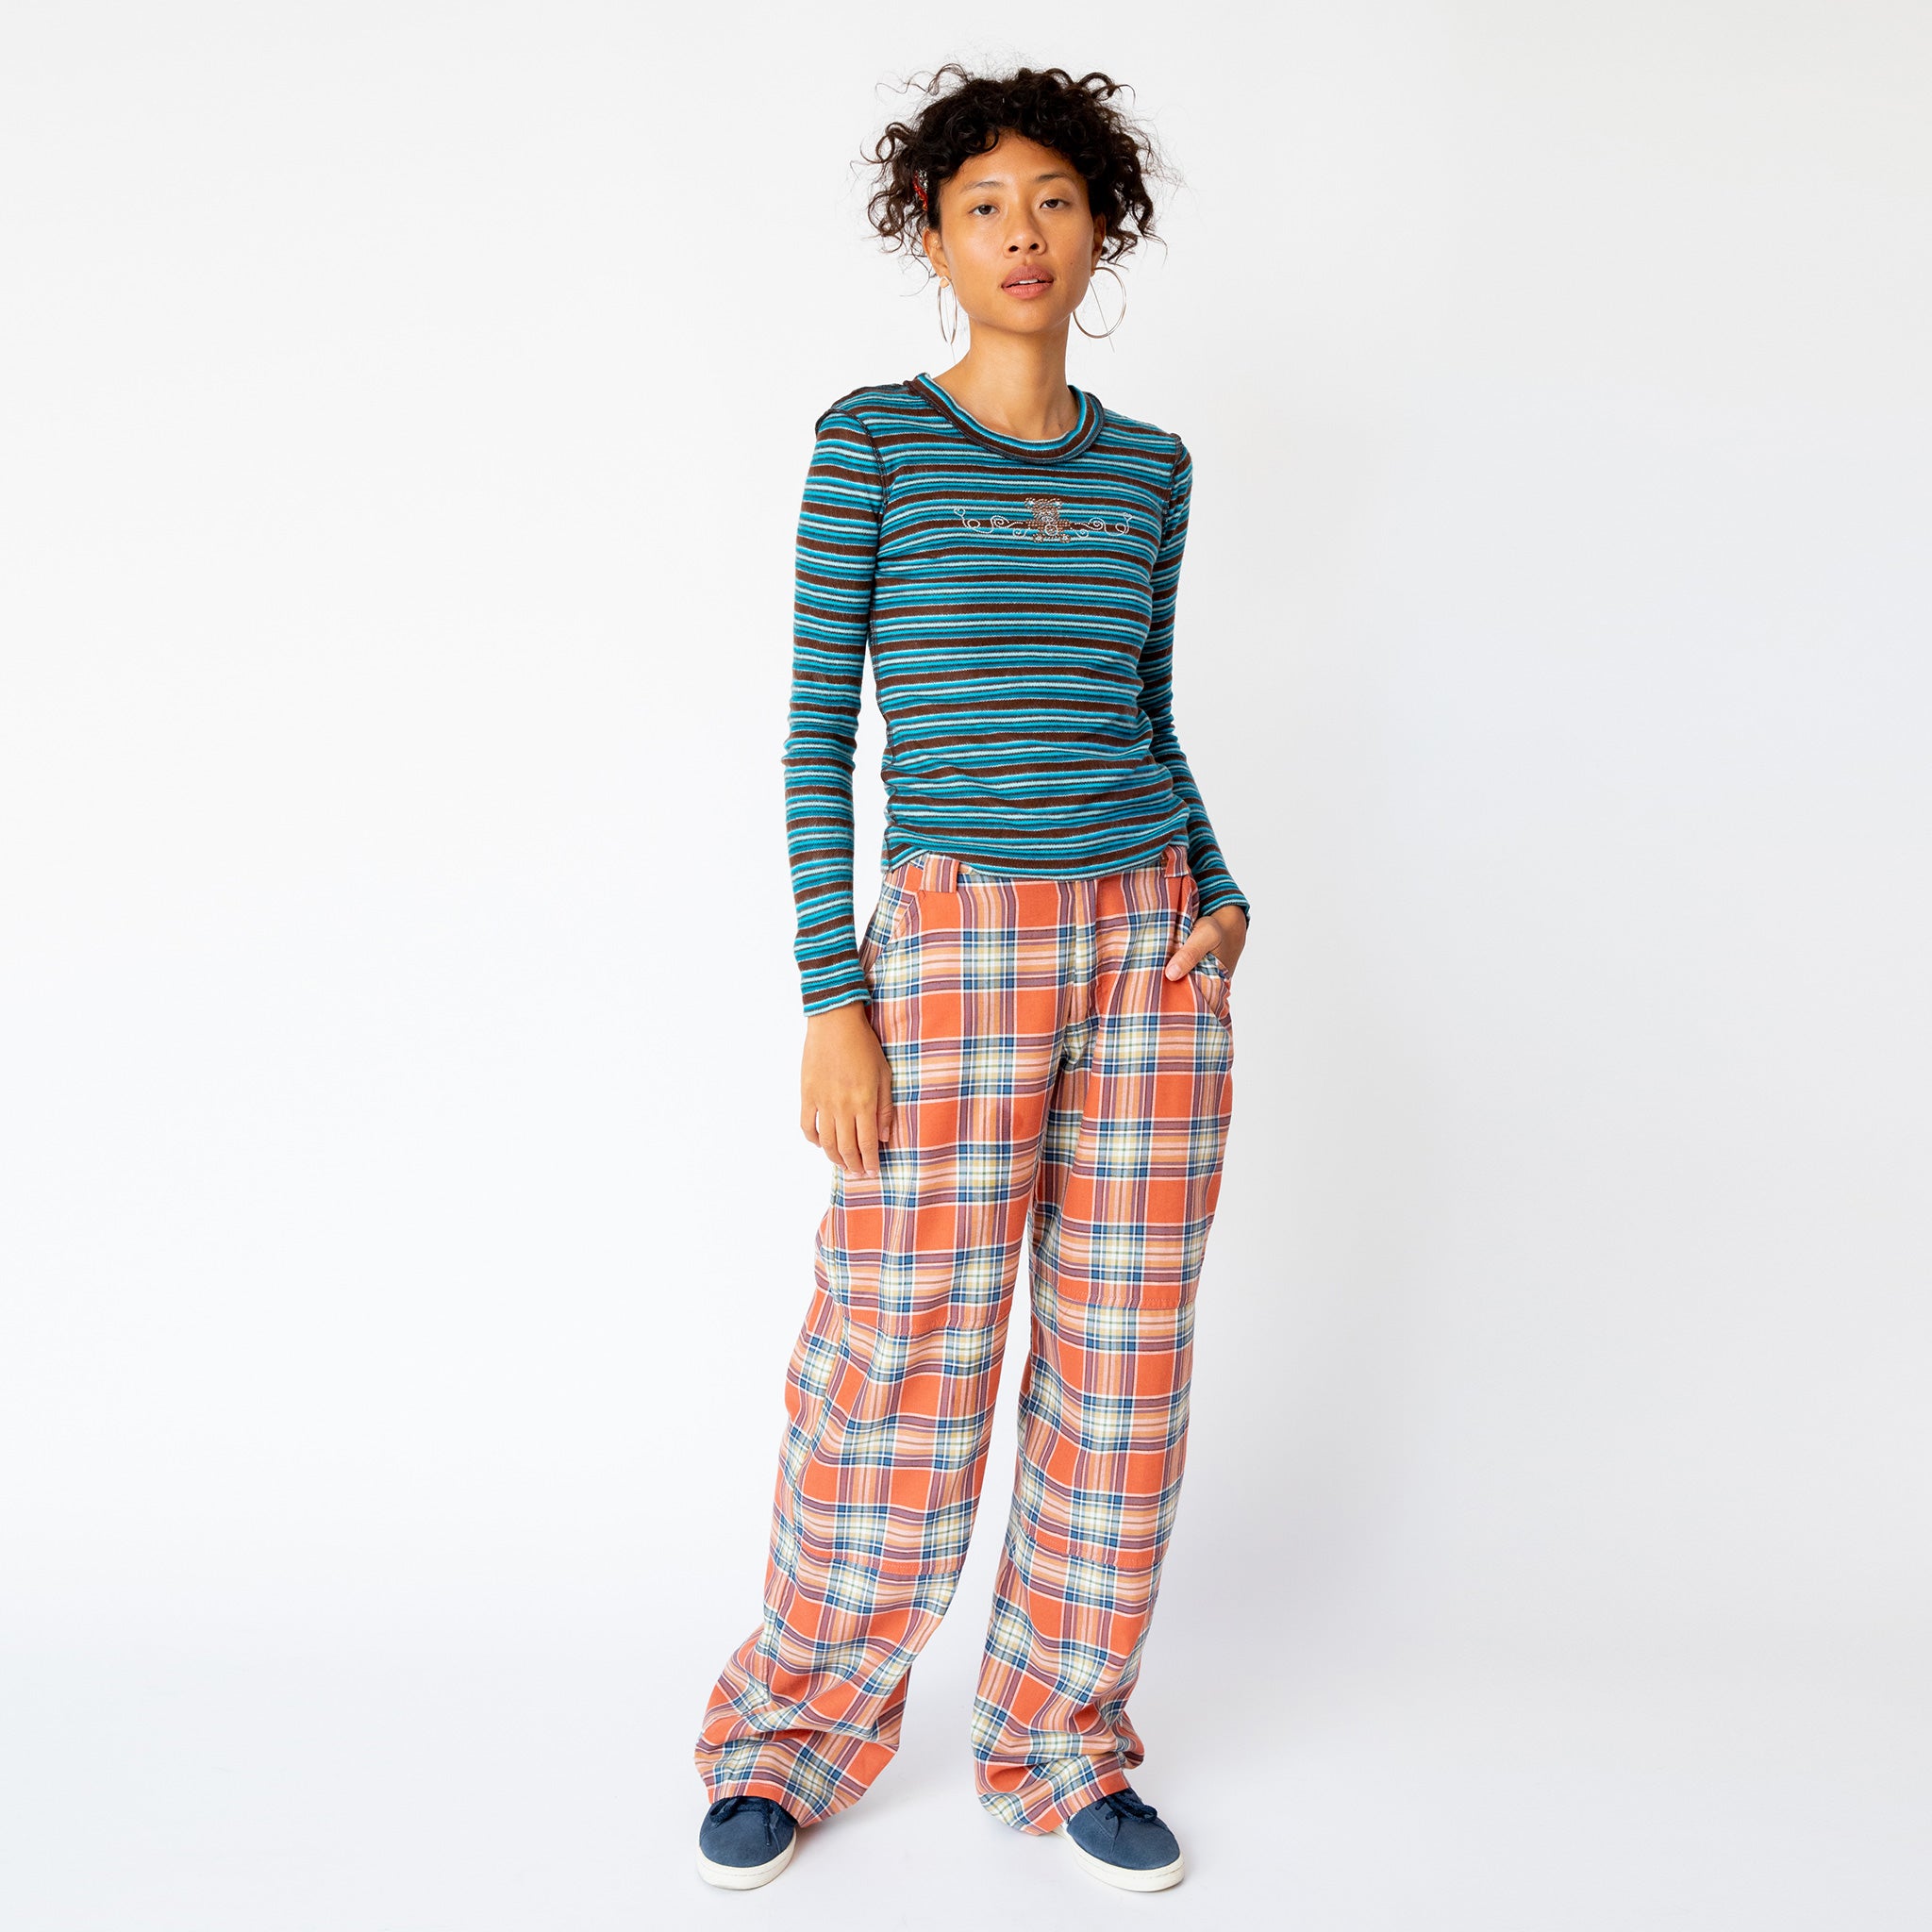 A model wears the coral plaid wide leg Clover Pant by Collina Strada, paired with a blue striped long sleeve.